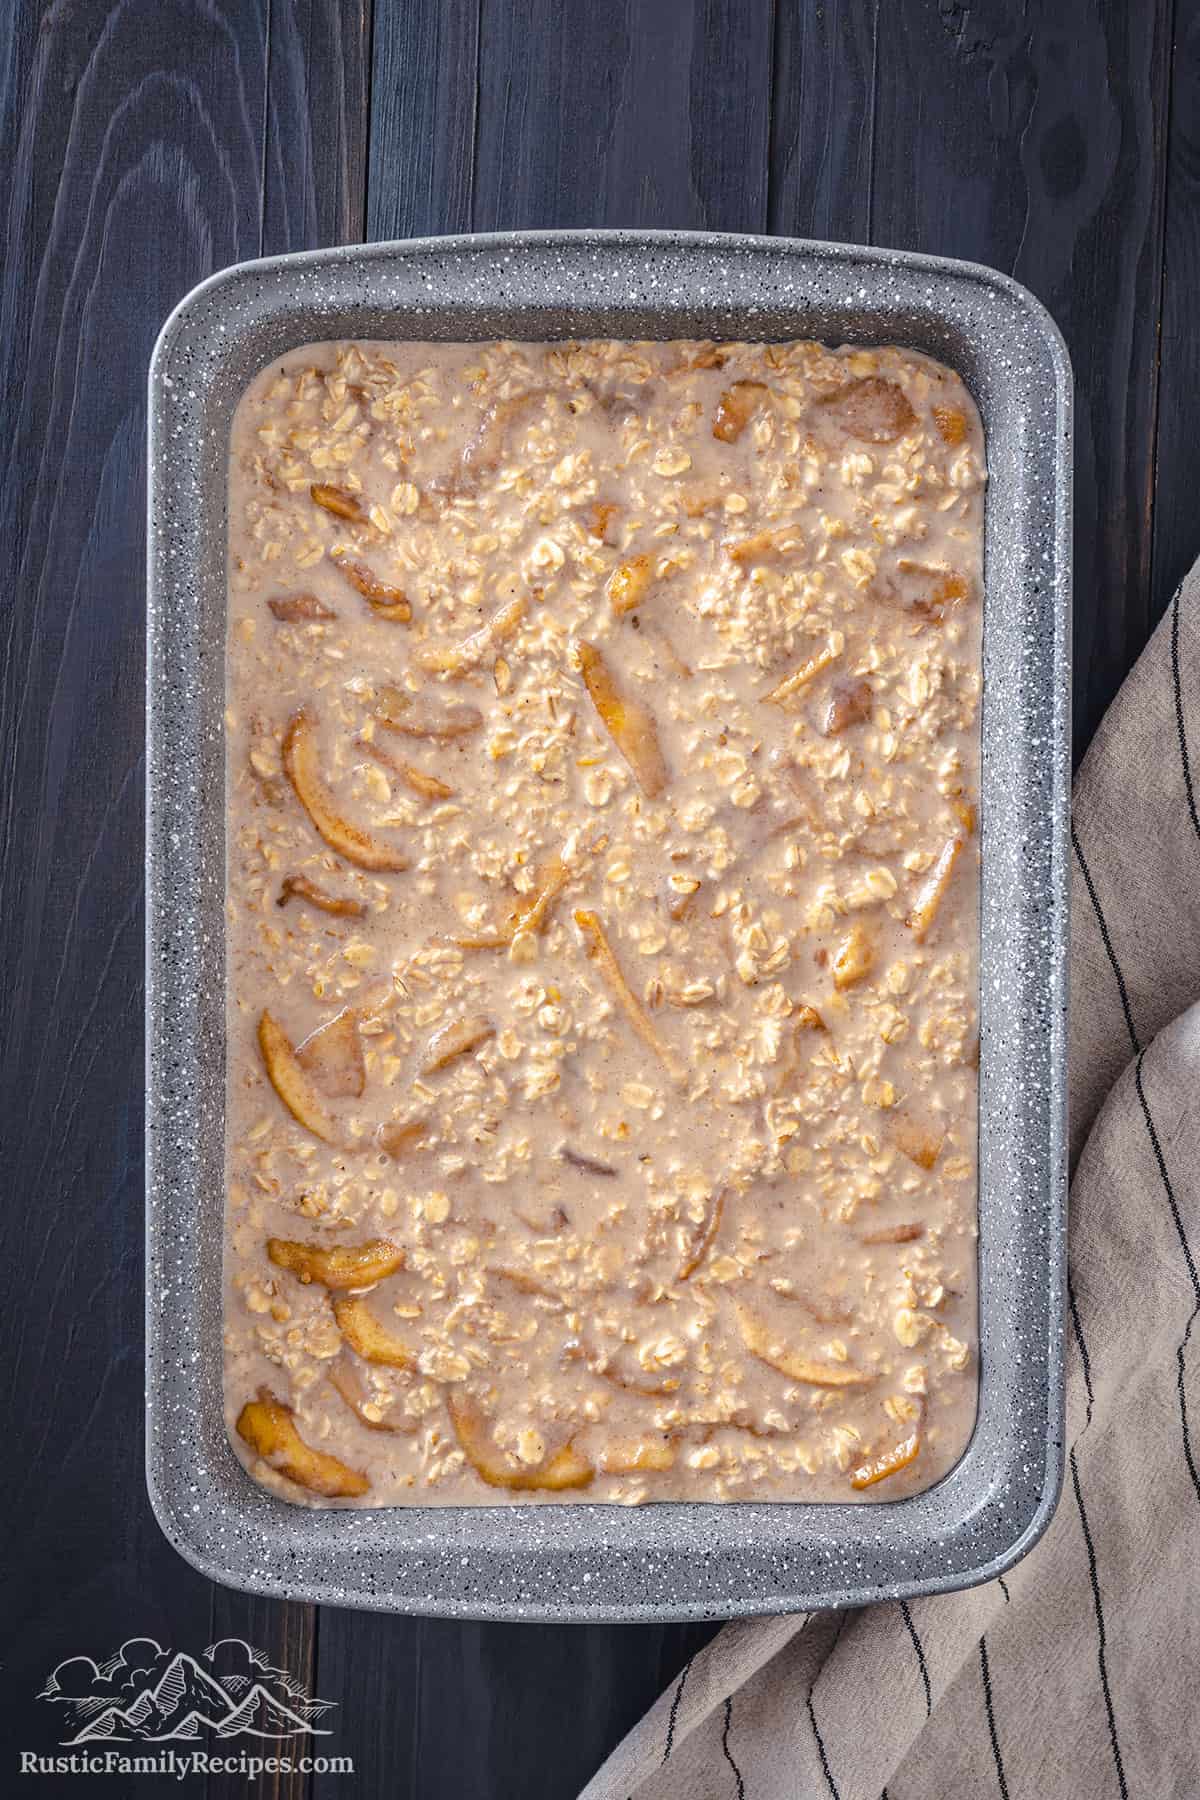 Apple oatmeal in a baking dish ready to go into the oven